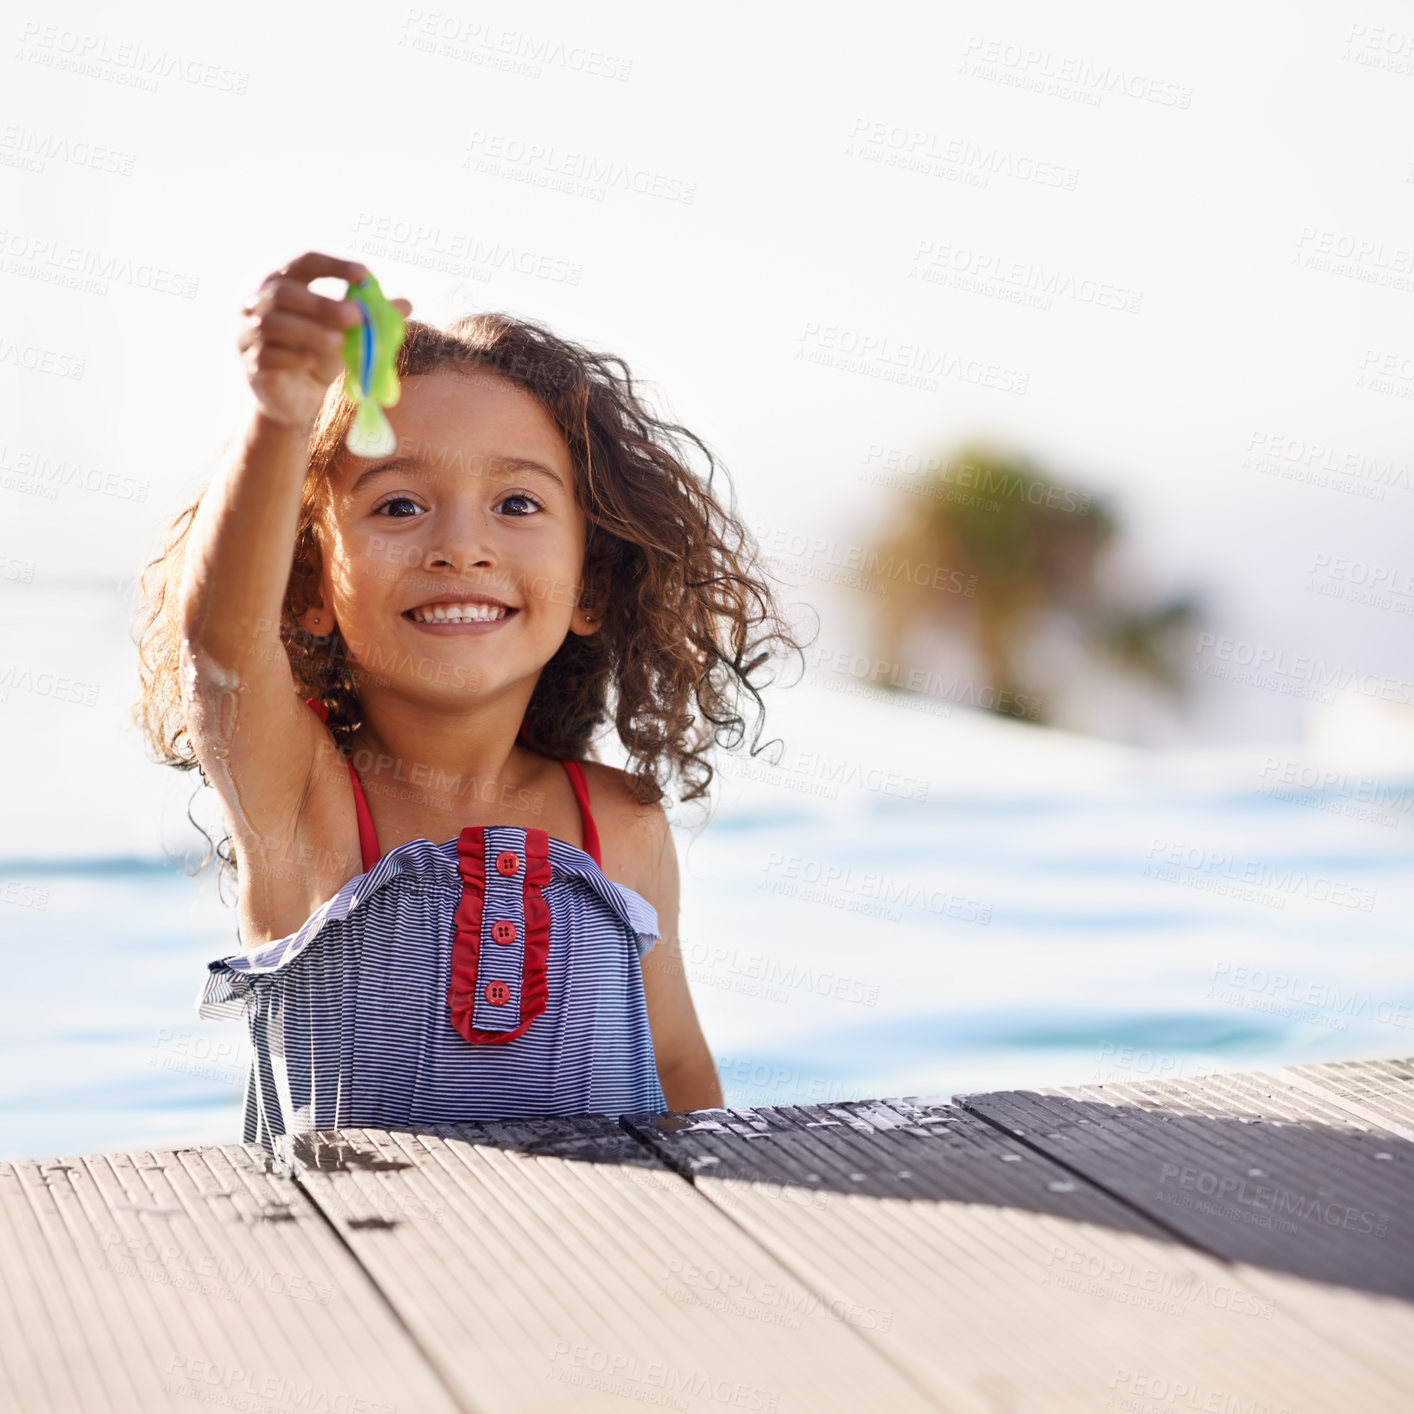 Buy stock photo Portrait of a happy little girl playing by the pool